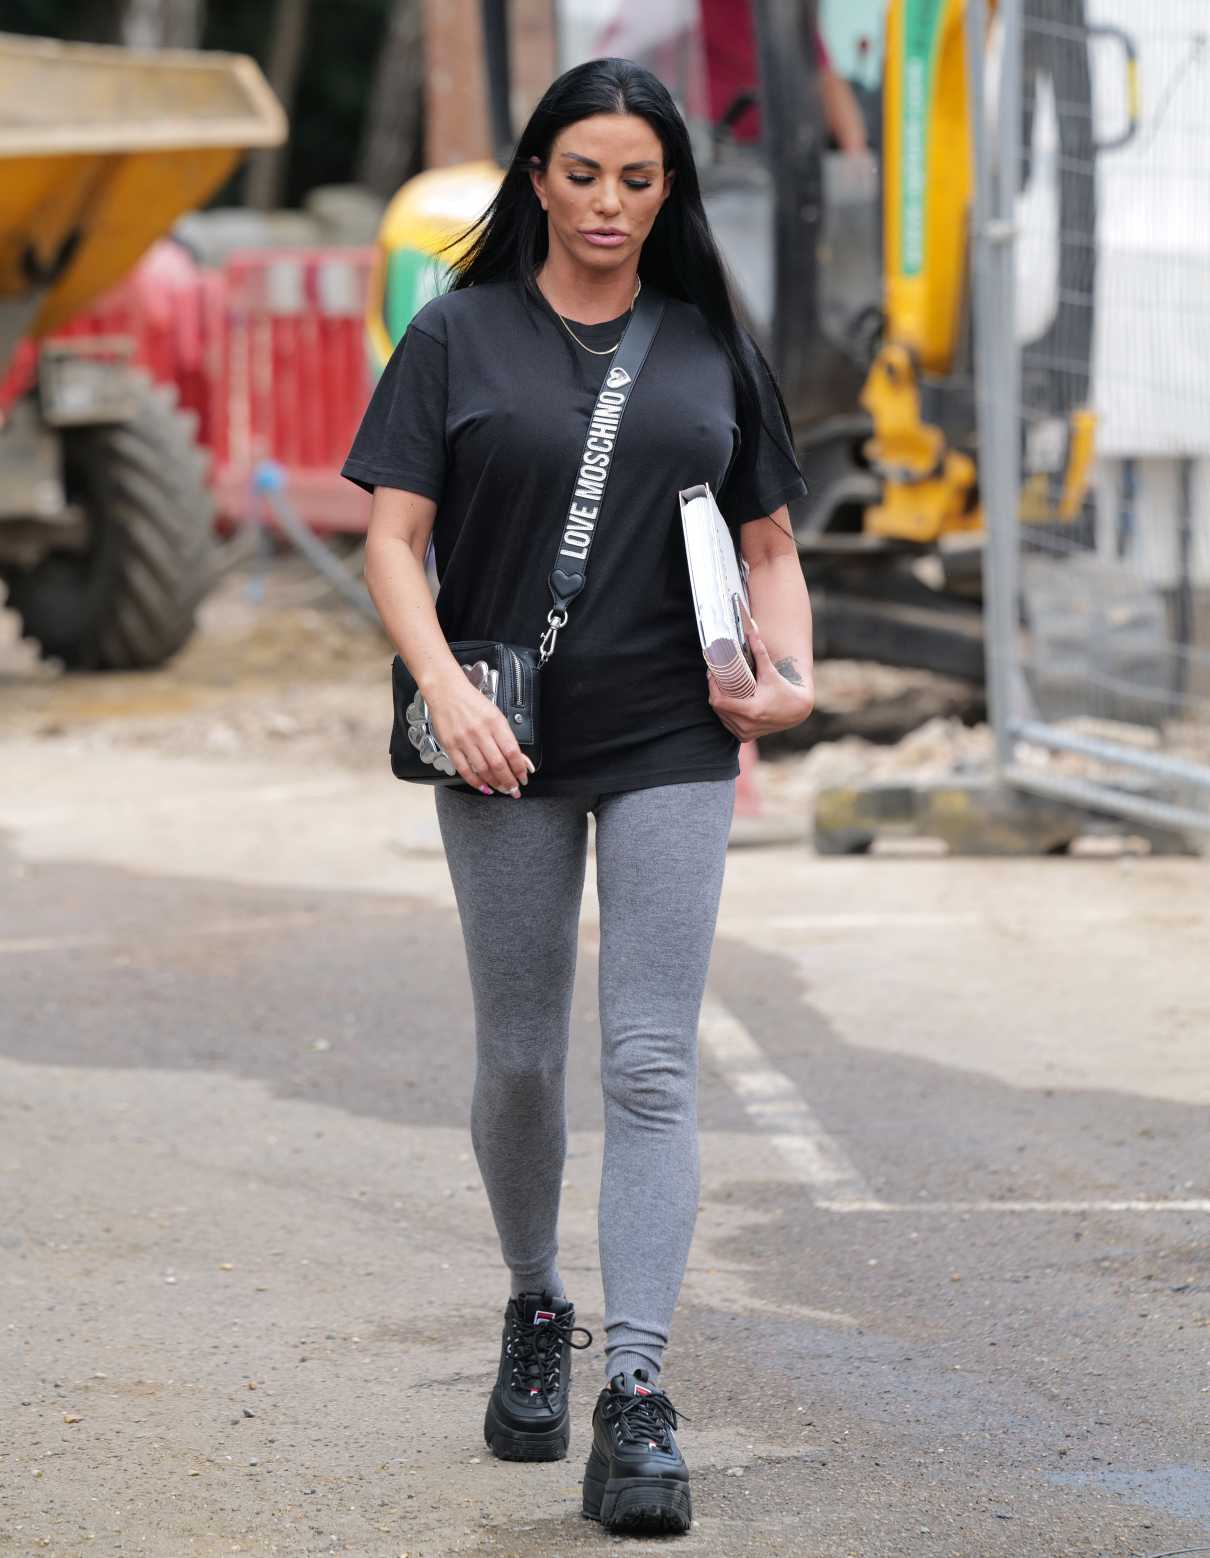 Katie Price in a Black Tee